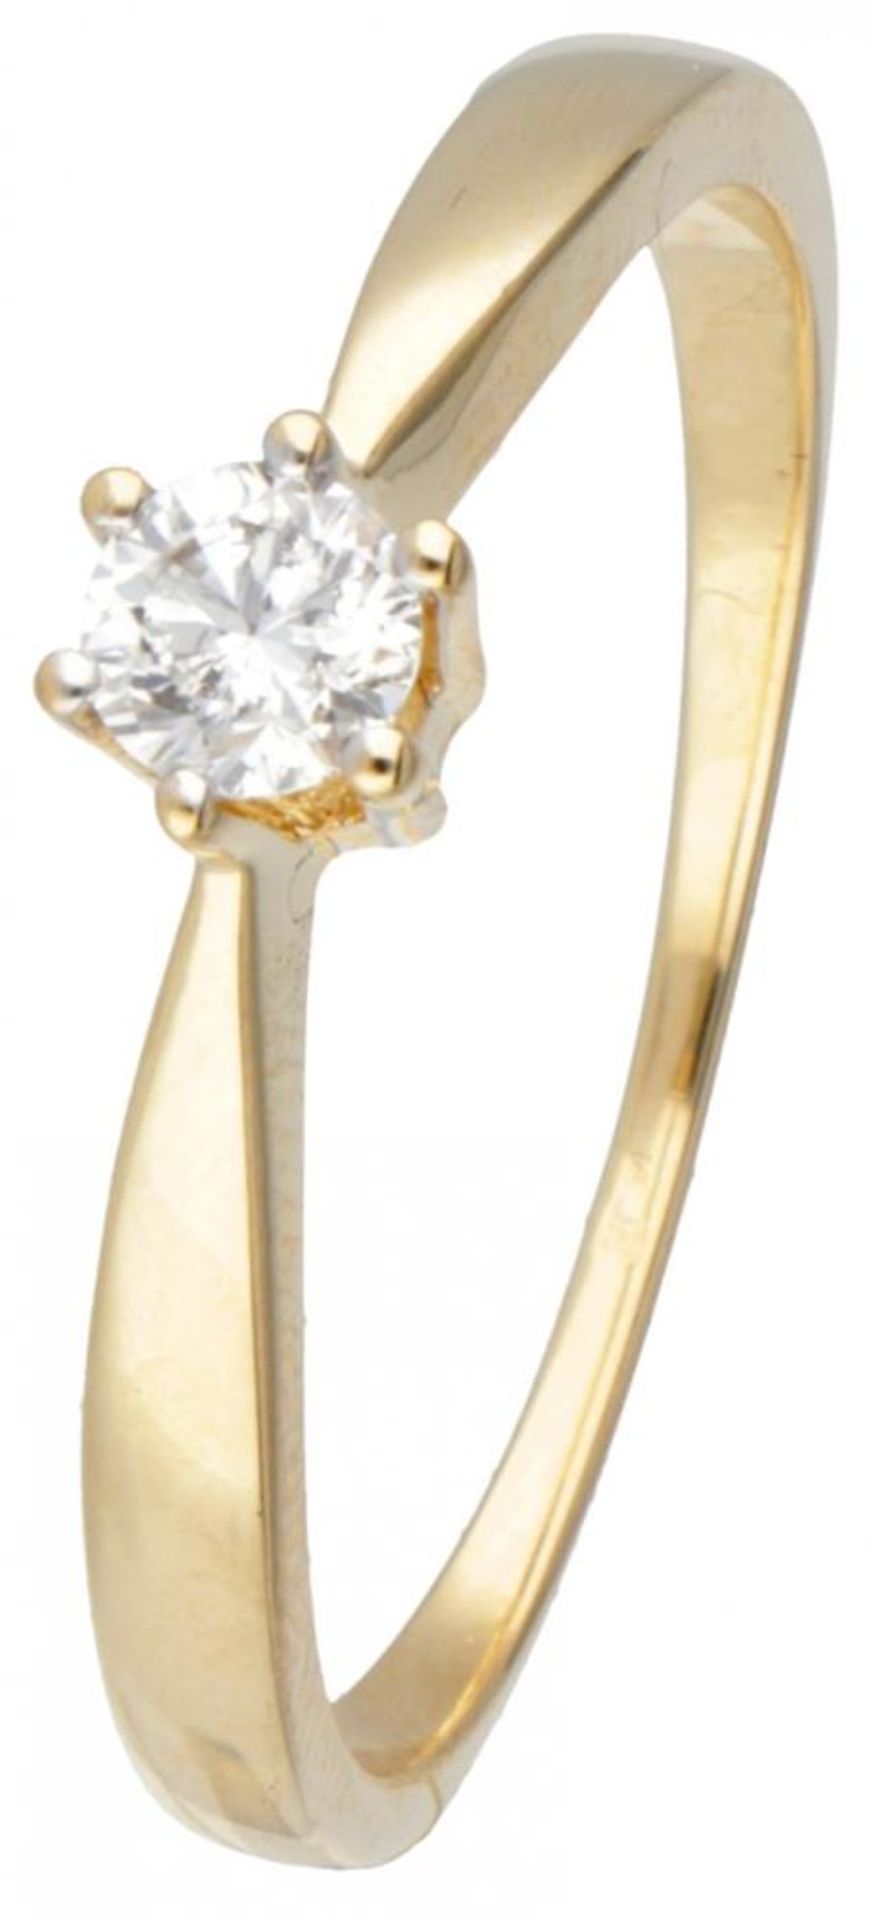 14K. Yellow gold solitaire ring set with approx. 0.25 ct. diamond.